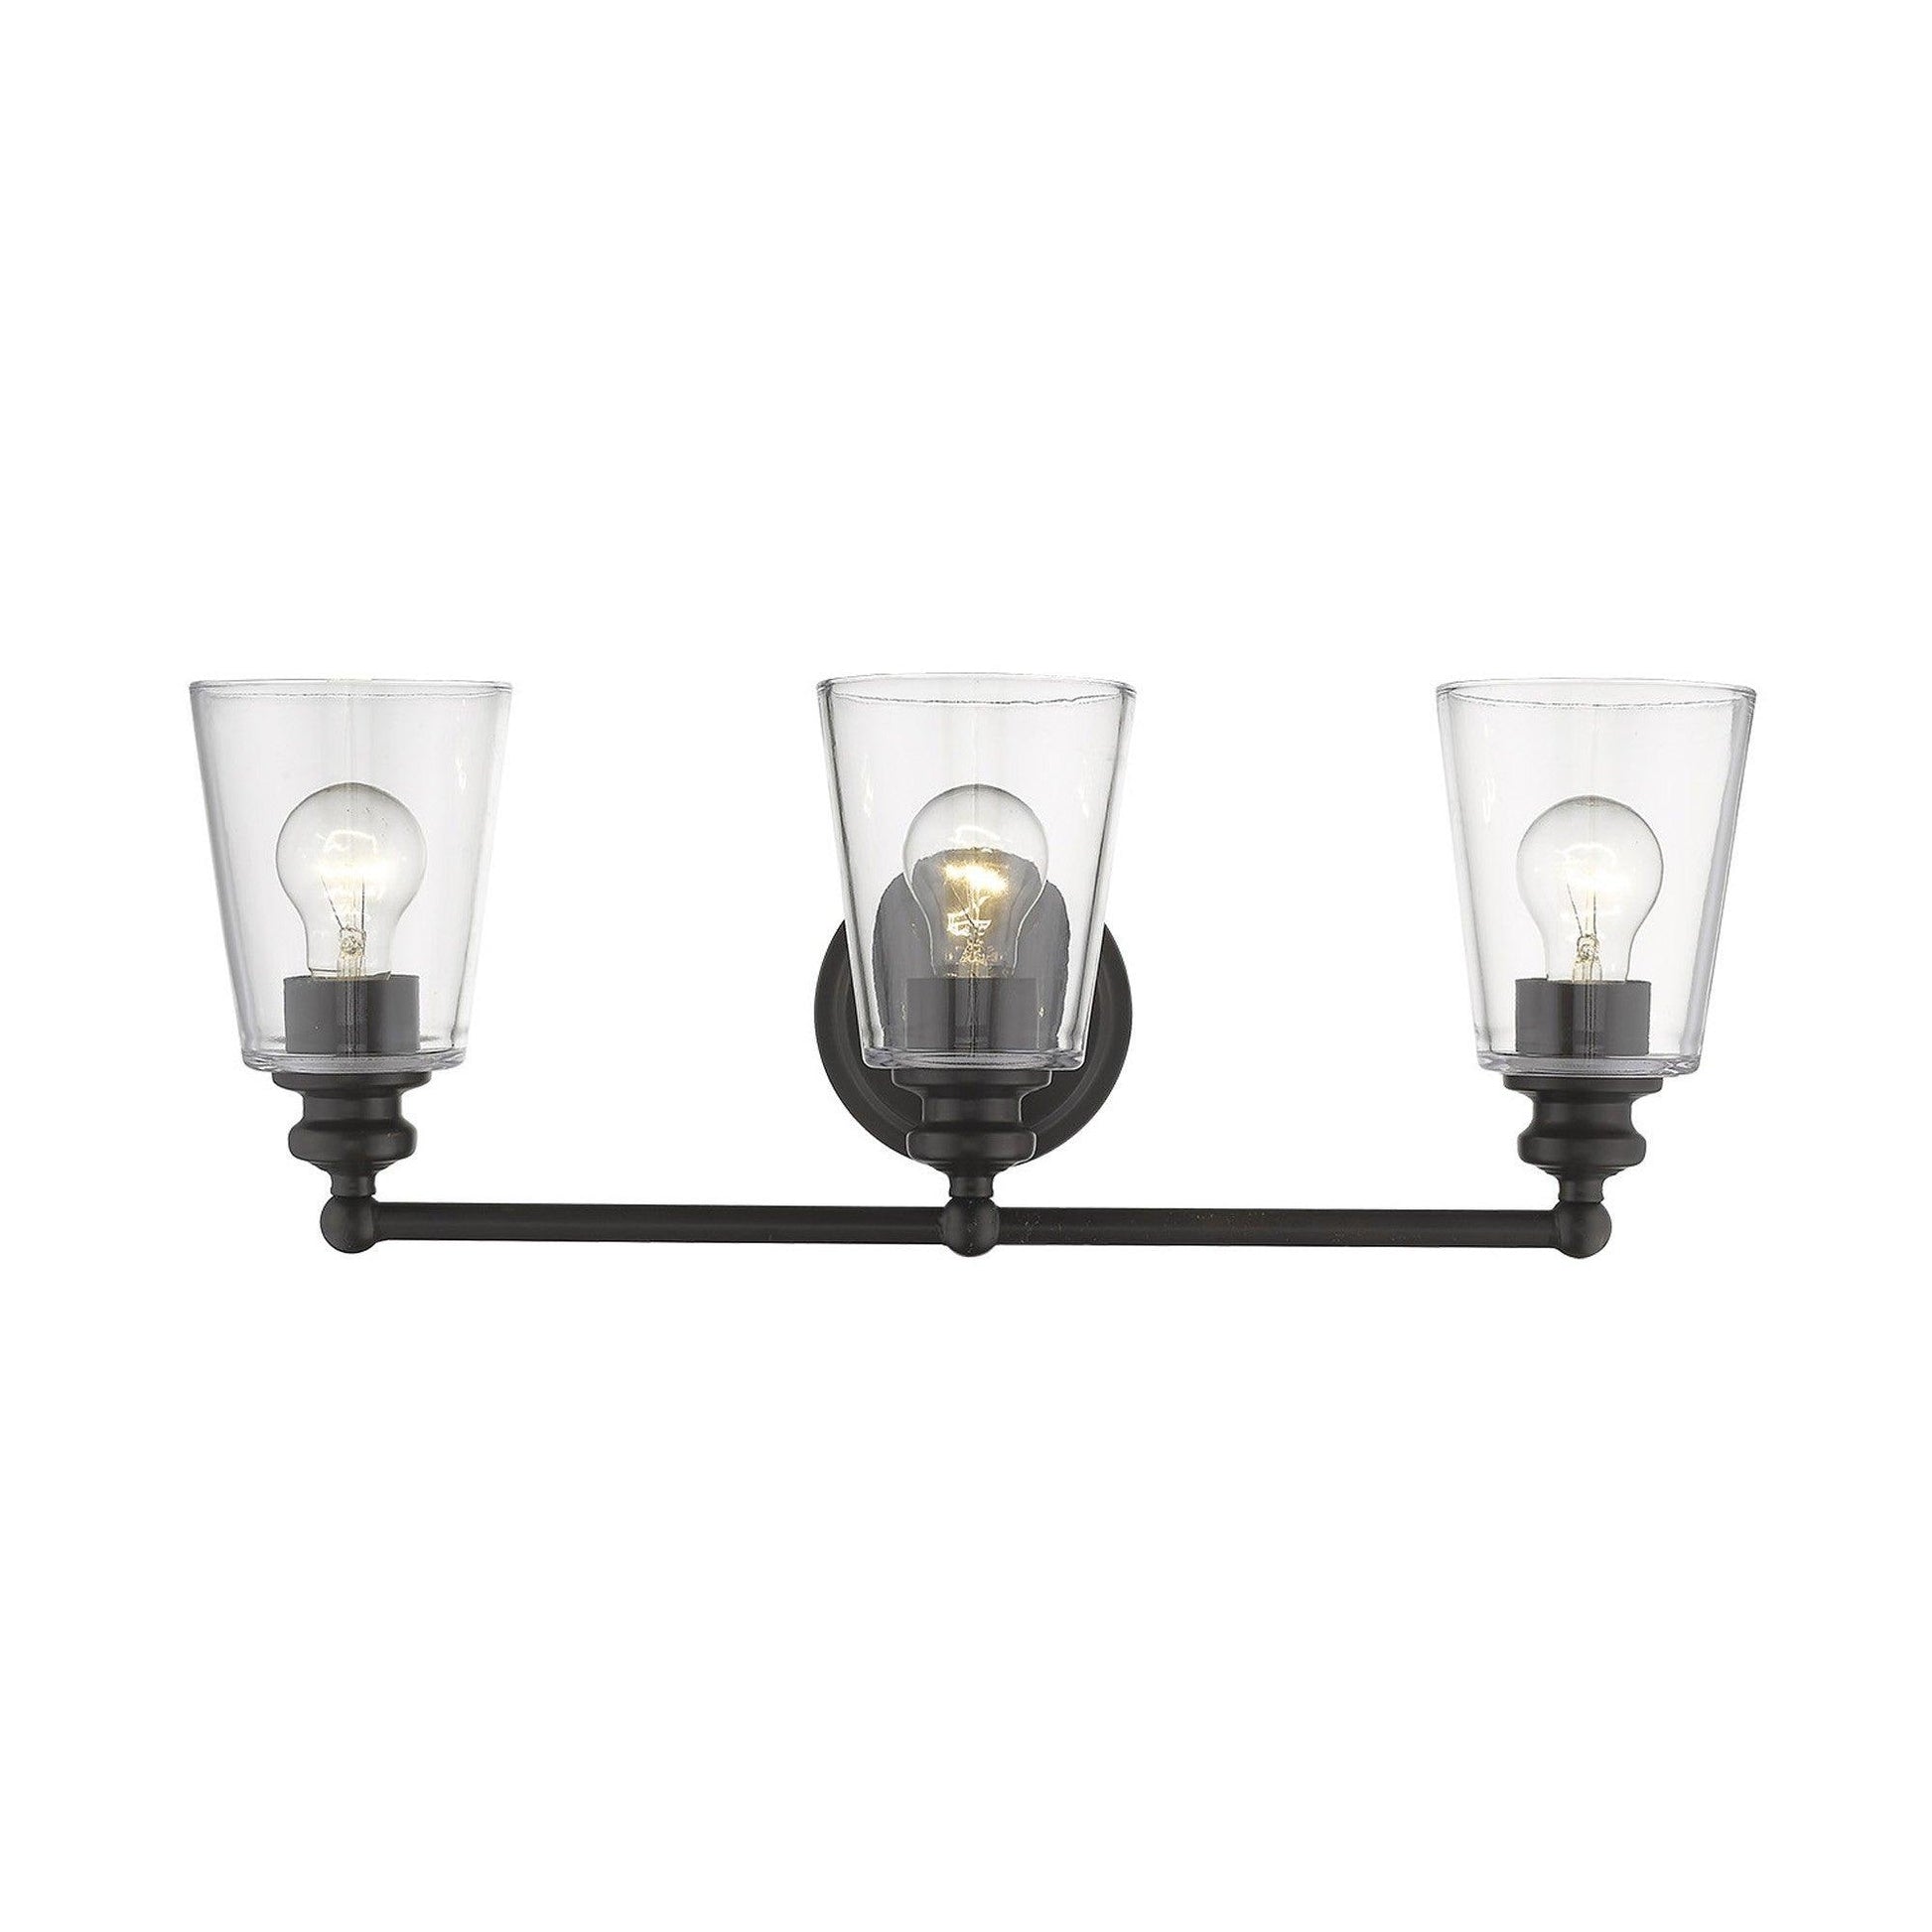 Three Light Antique Bronze Glass Shade Wall Sconce - AFS